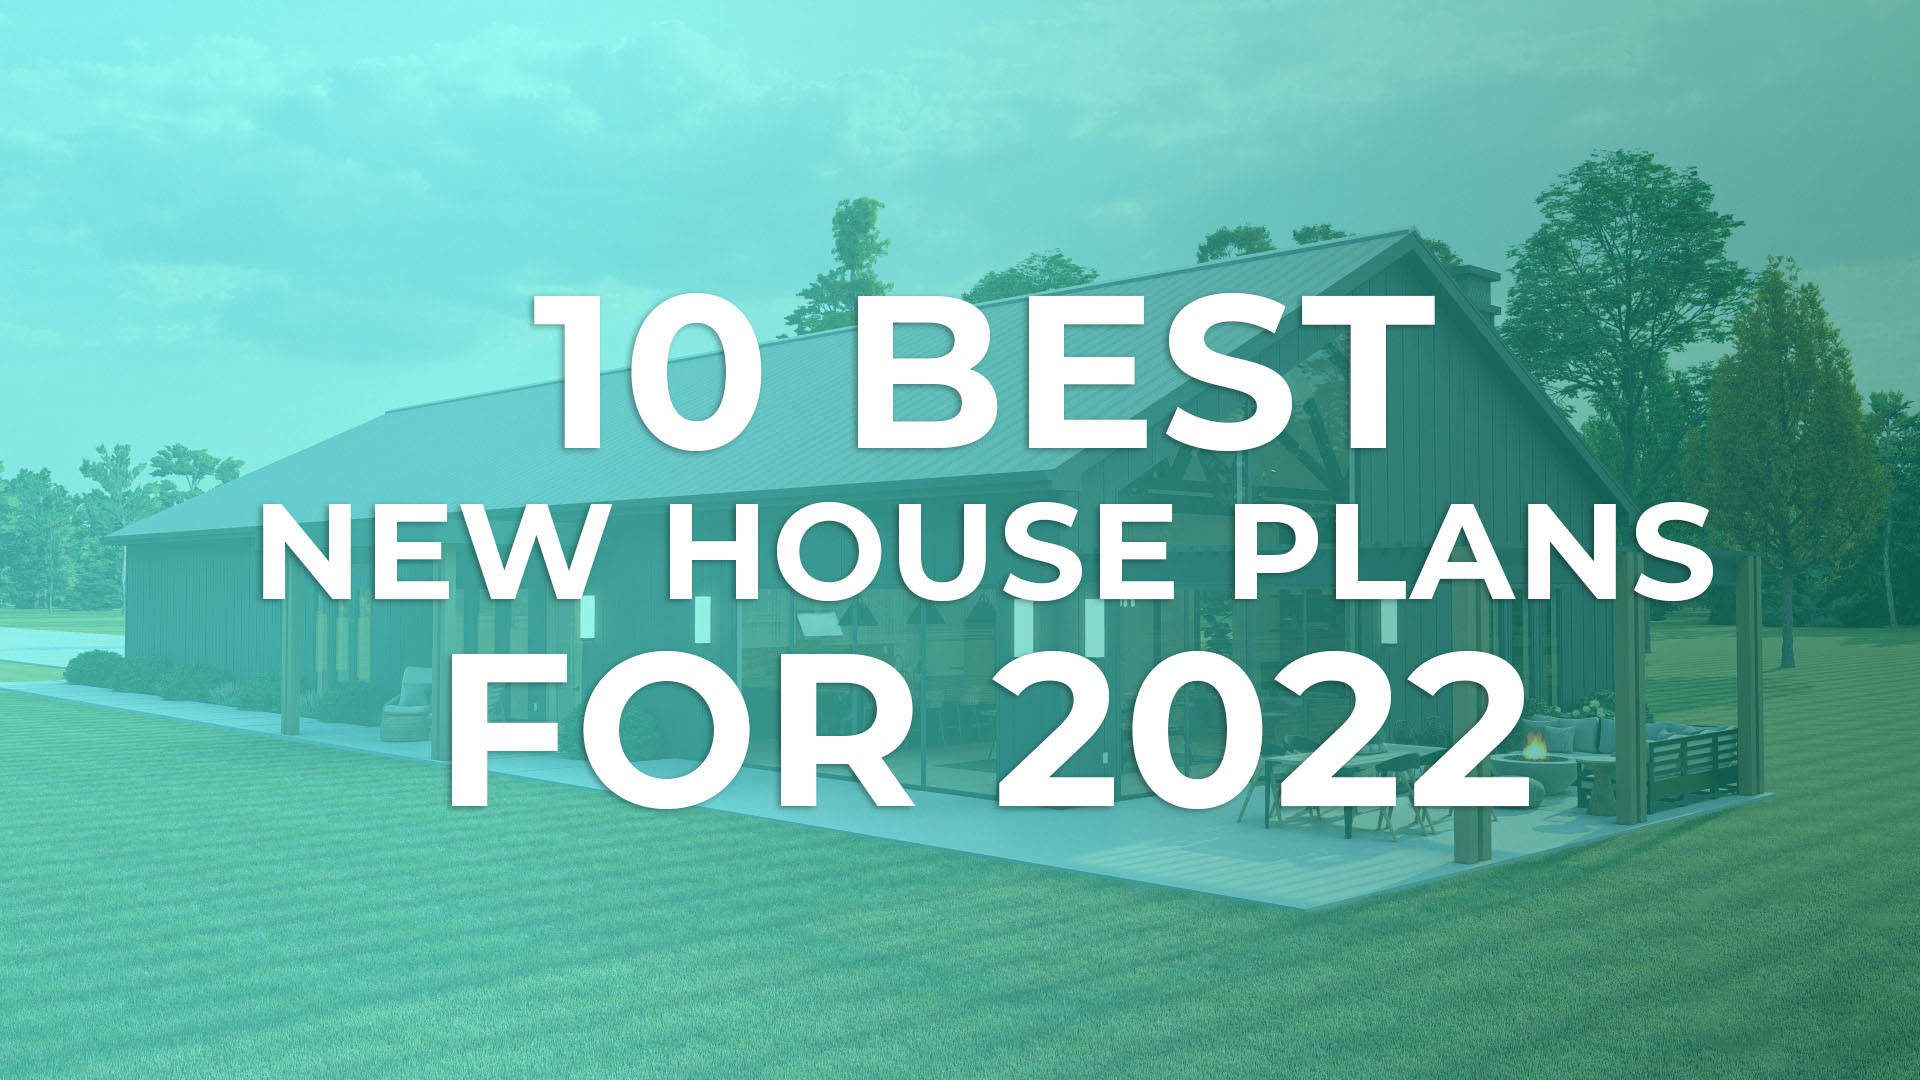 10 Best New House Plans for 2022